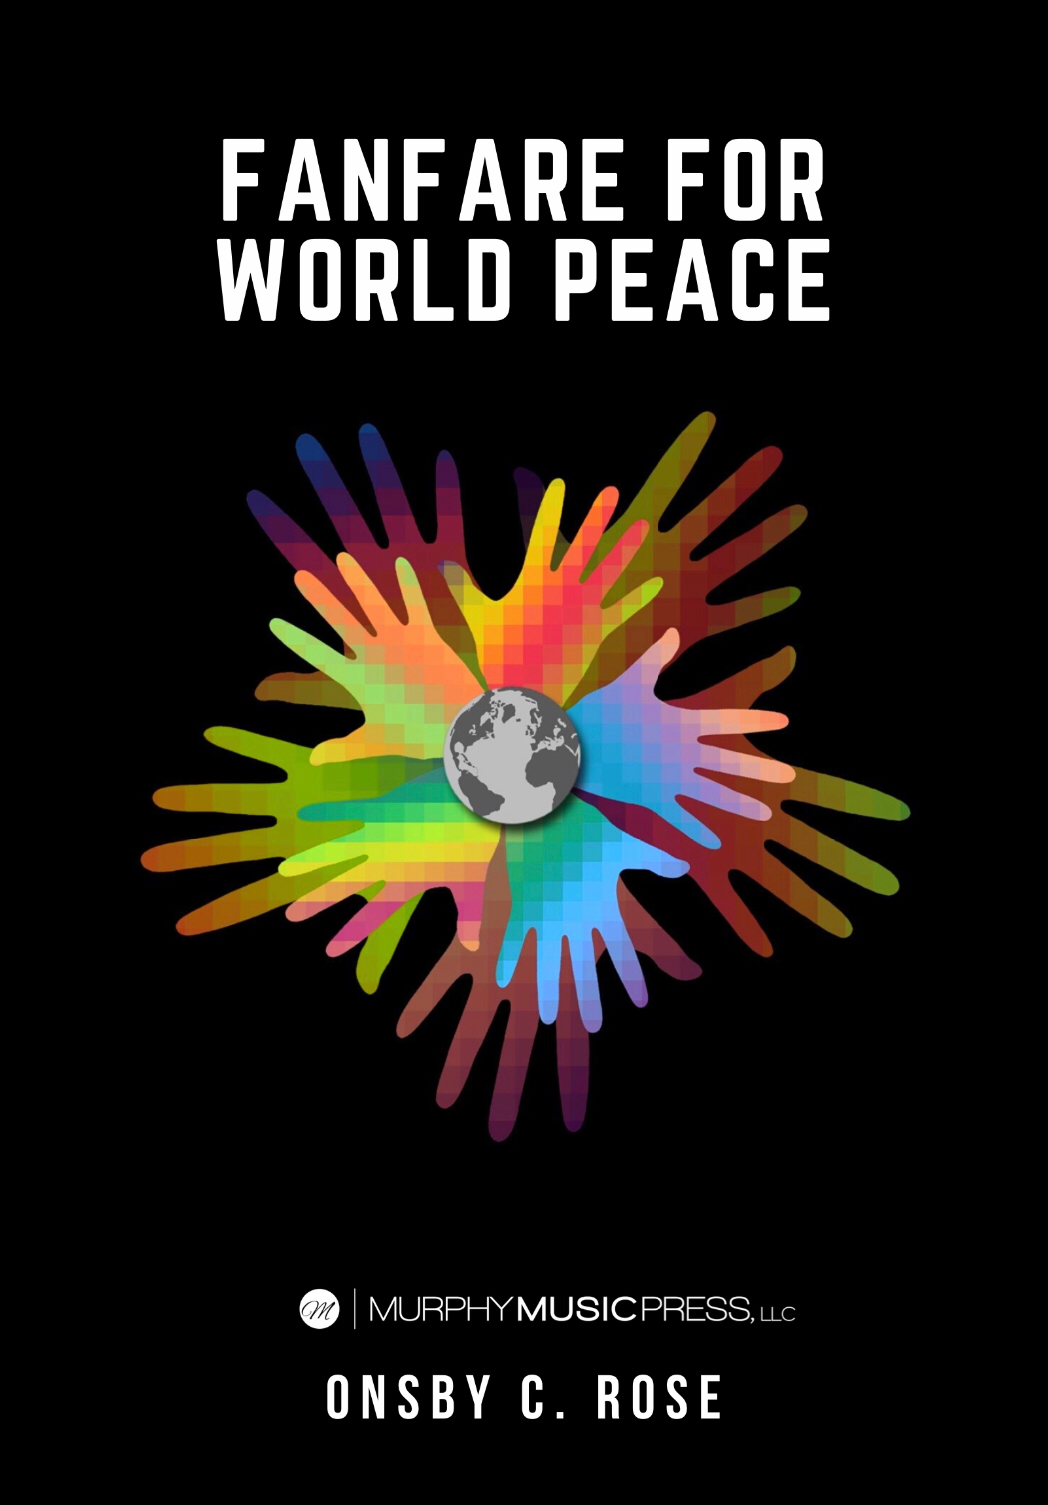 Fanfare For World Peace by Onsby C. Rose